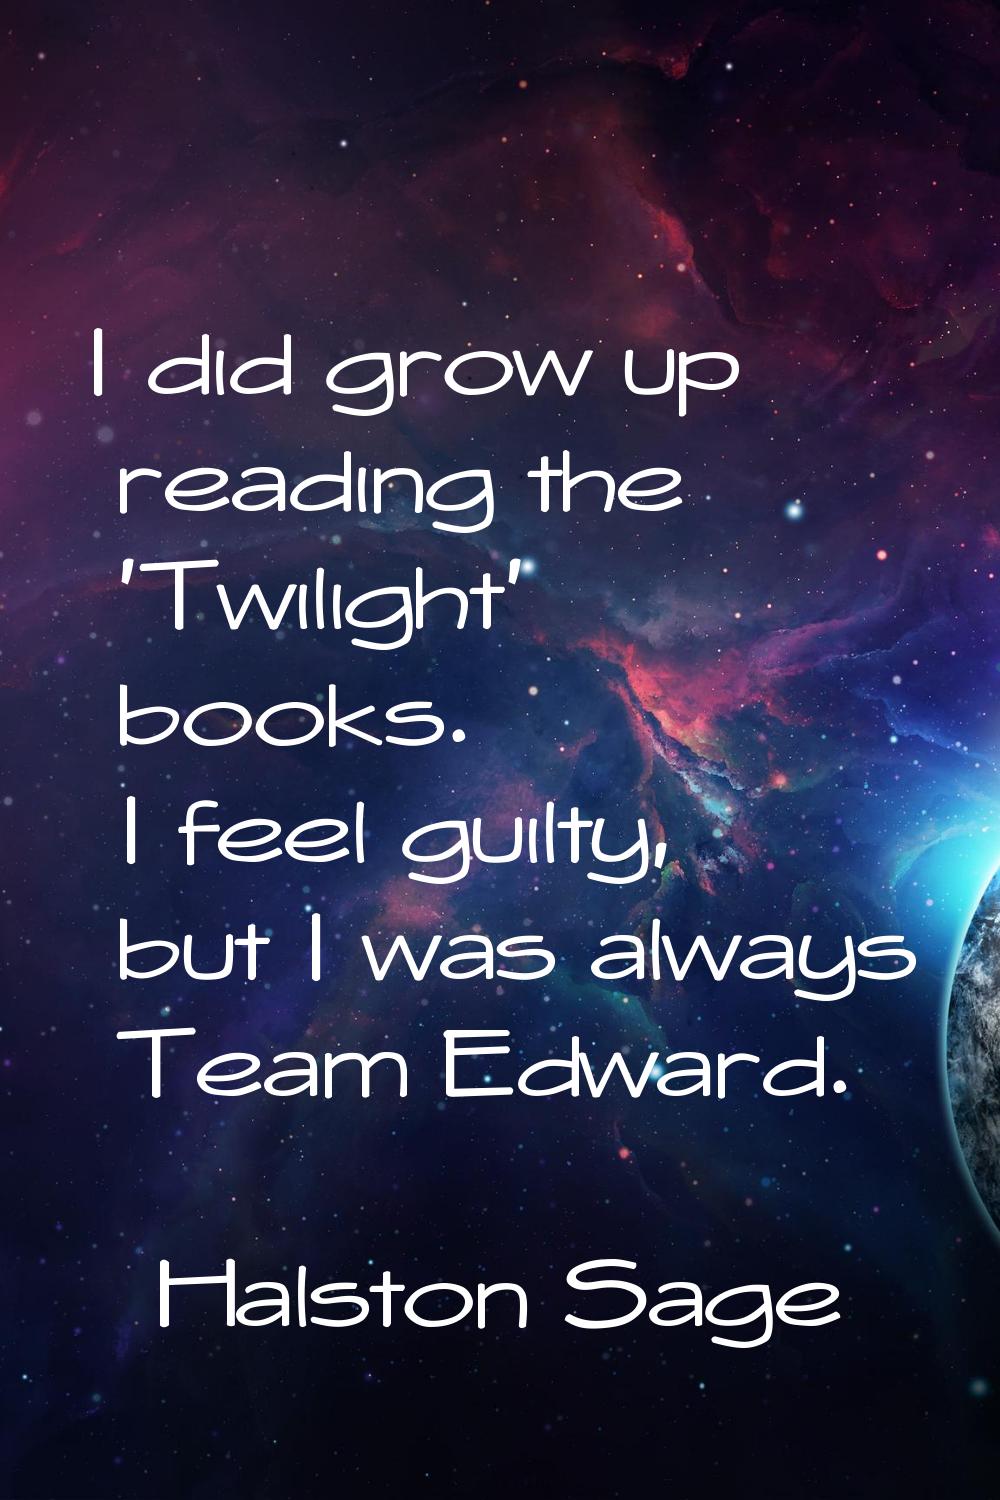 I did grow up reading the 'Twilight' books. I feel guilty, but I was always Team Edward.